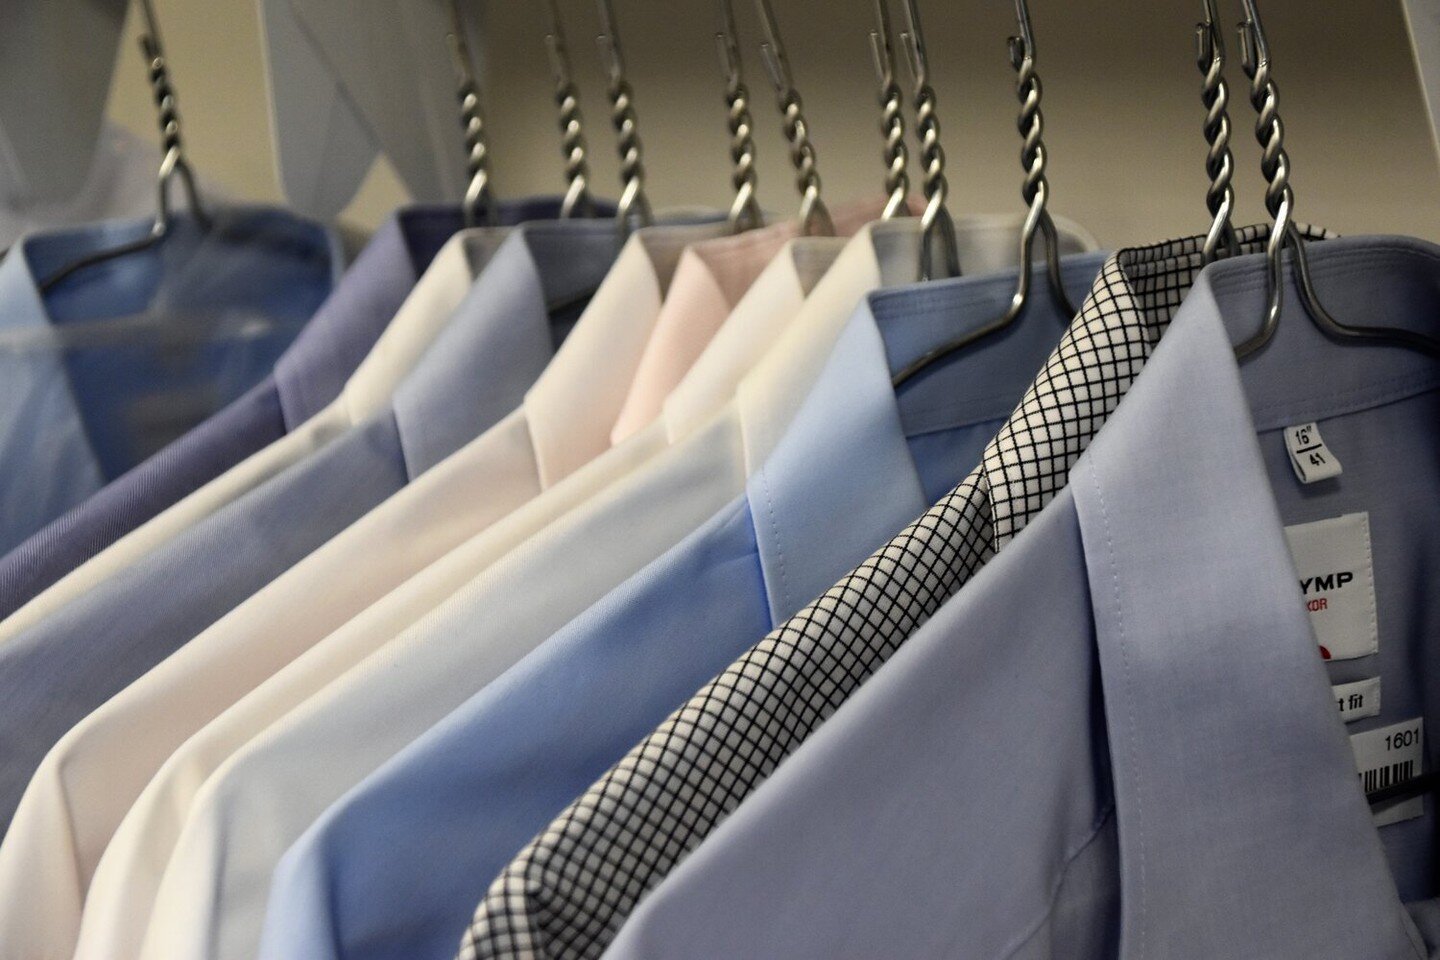 We provide laundered shirt services! Inquire today!

www.ourcleanersny.com